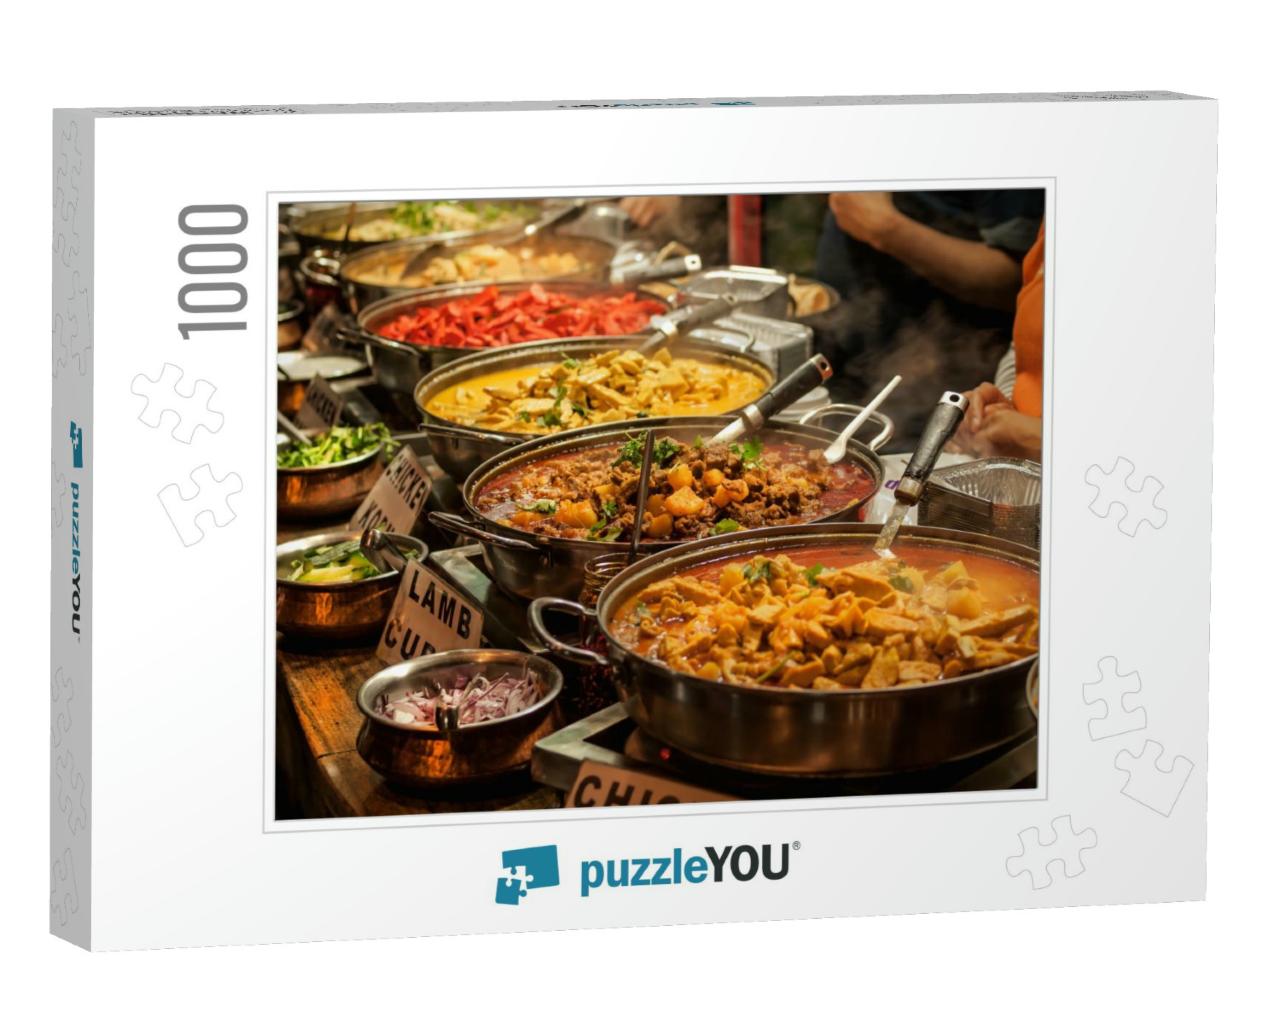 Oriental Food - Indian Takeaway At a London's Market... Jigsaw Puzzle with 1000 pieces